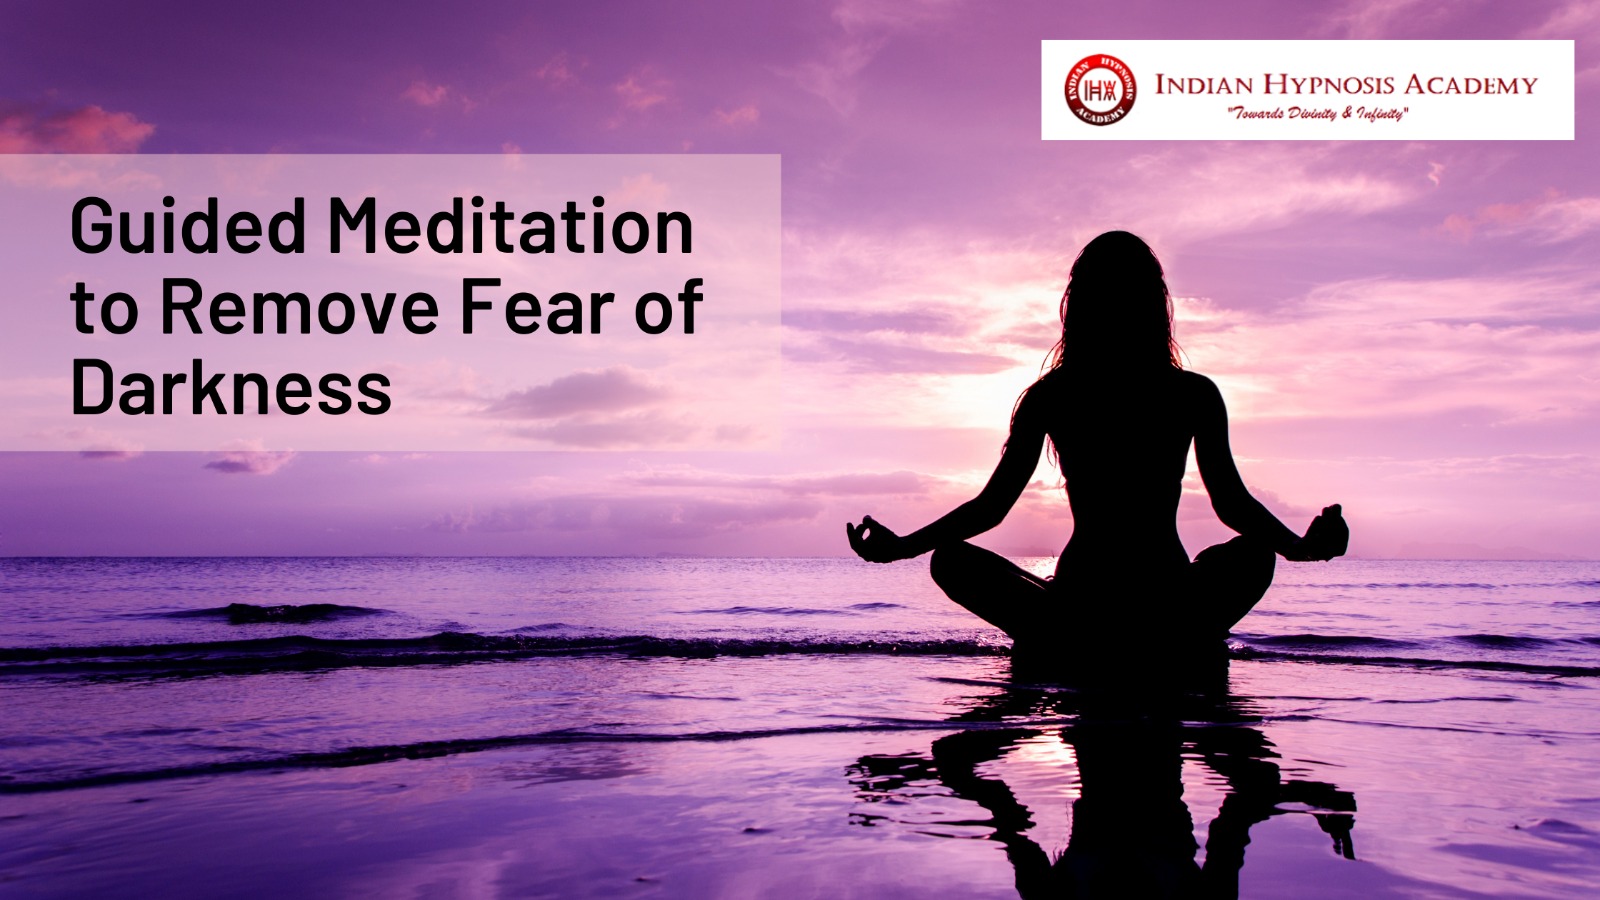 Guided Meditation to Remove Fear of Darkness